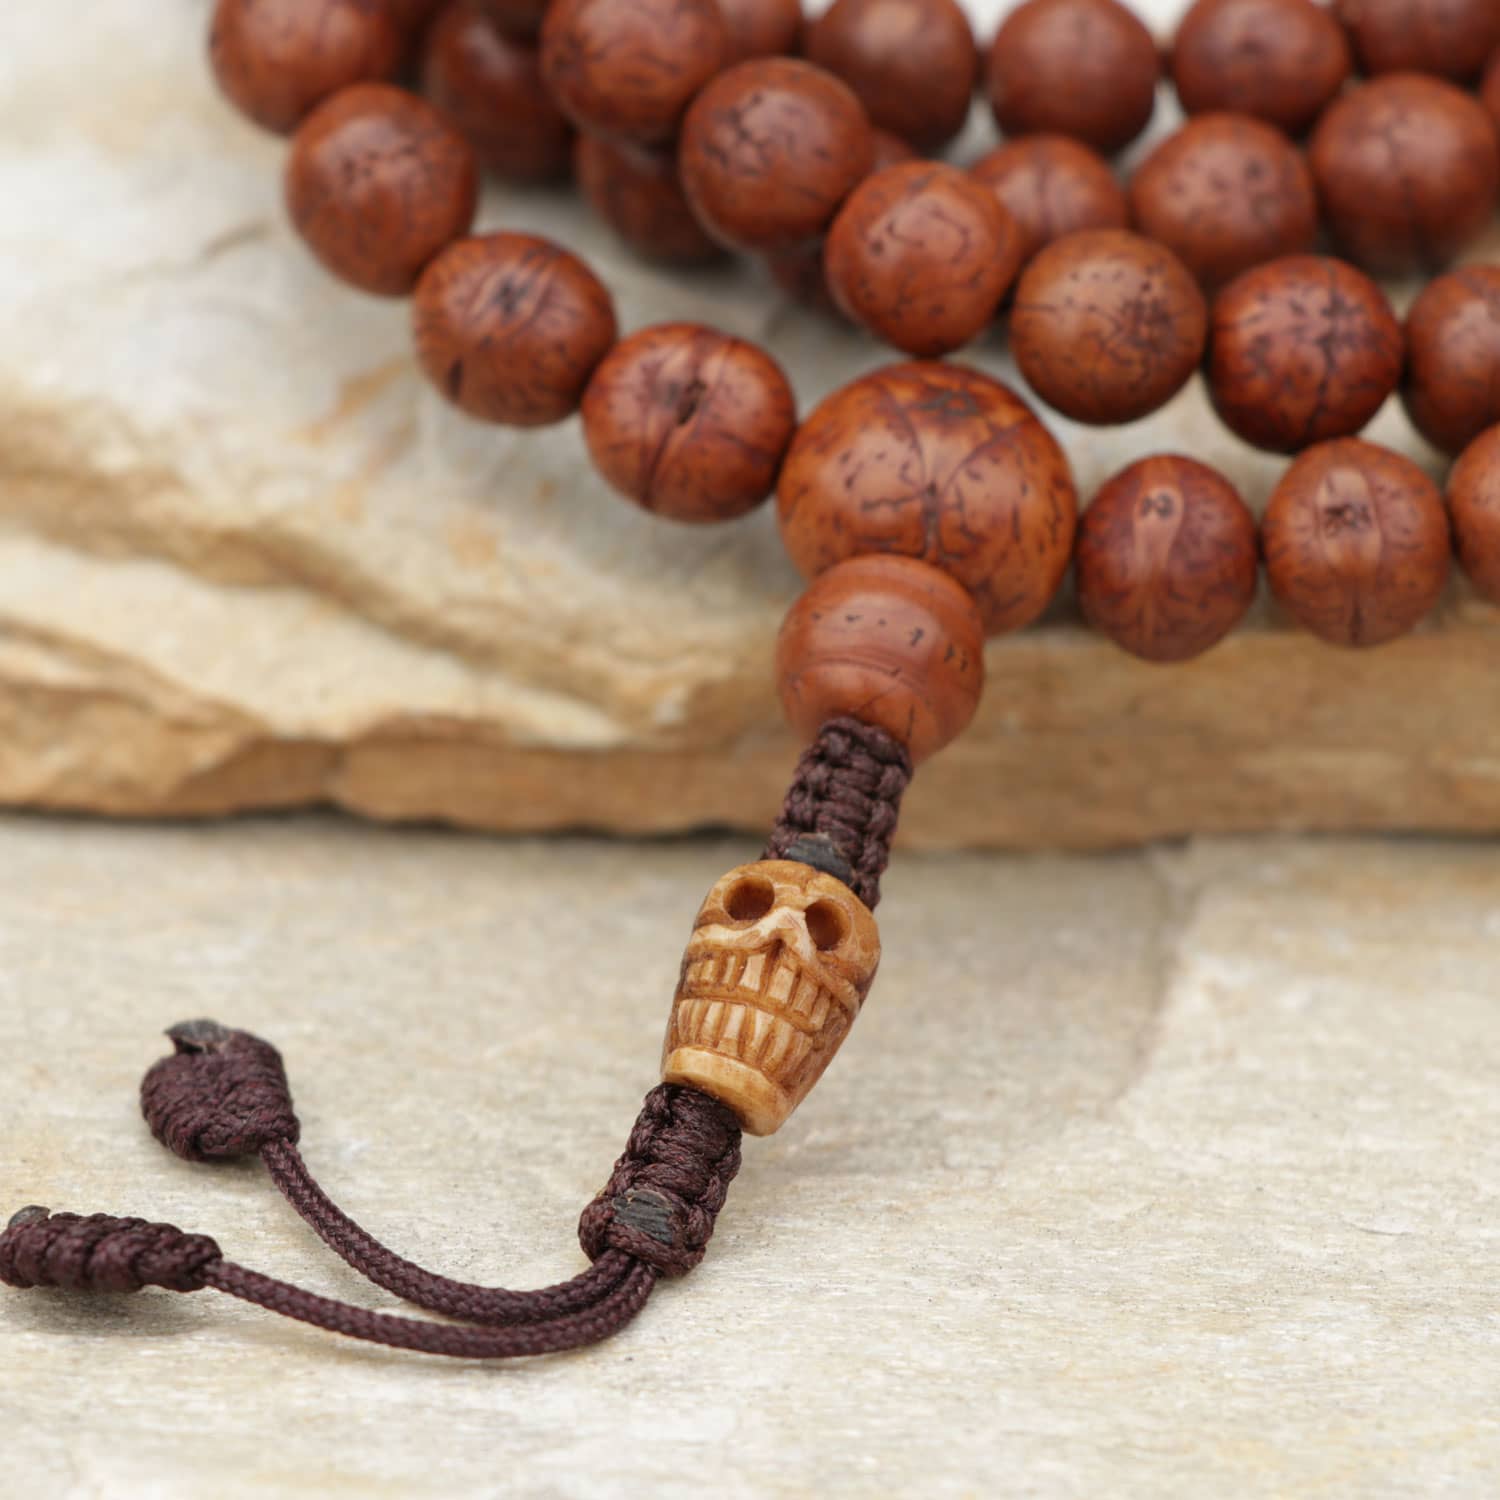 108 Authentic Bodhi Seed Mala Prayer Beads With Dorje and Skull